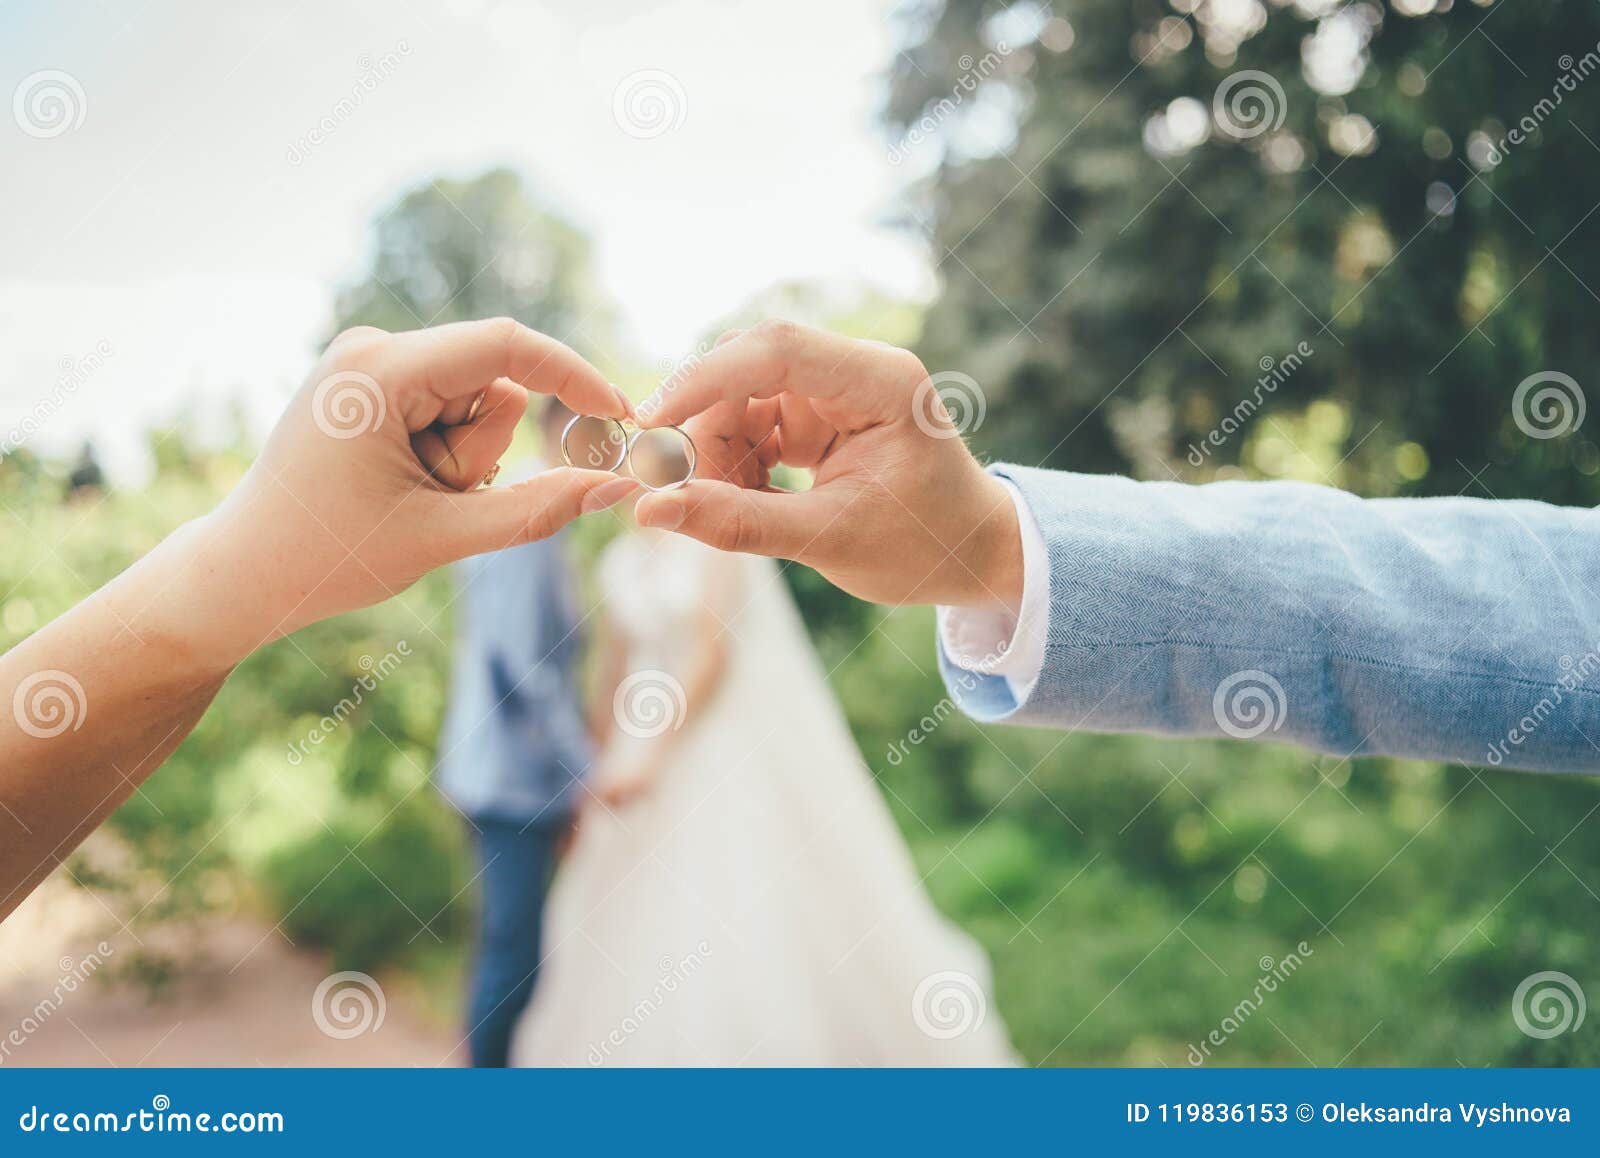 Funny Wedding Photo With Newlyweds And Rings Stock Image